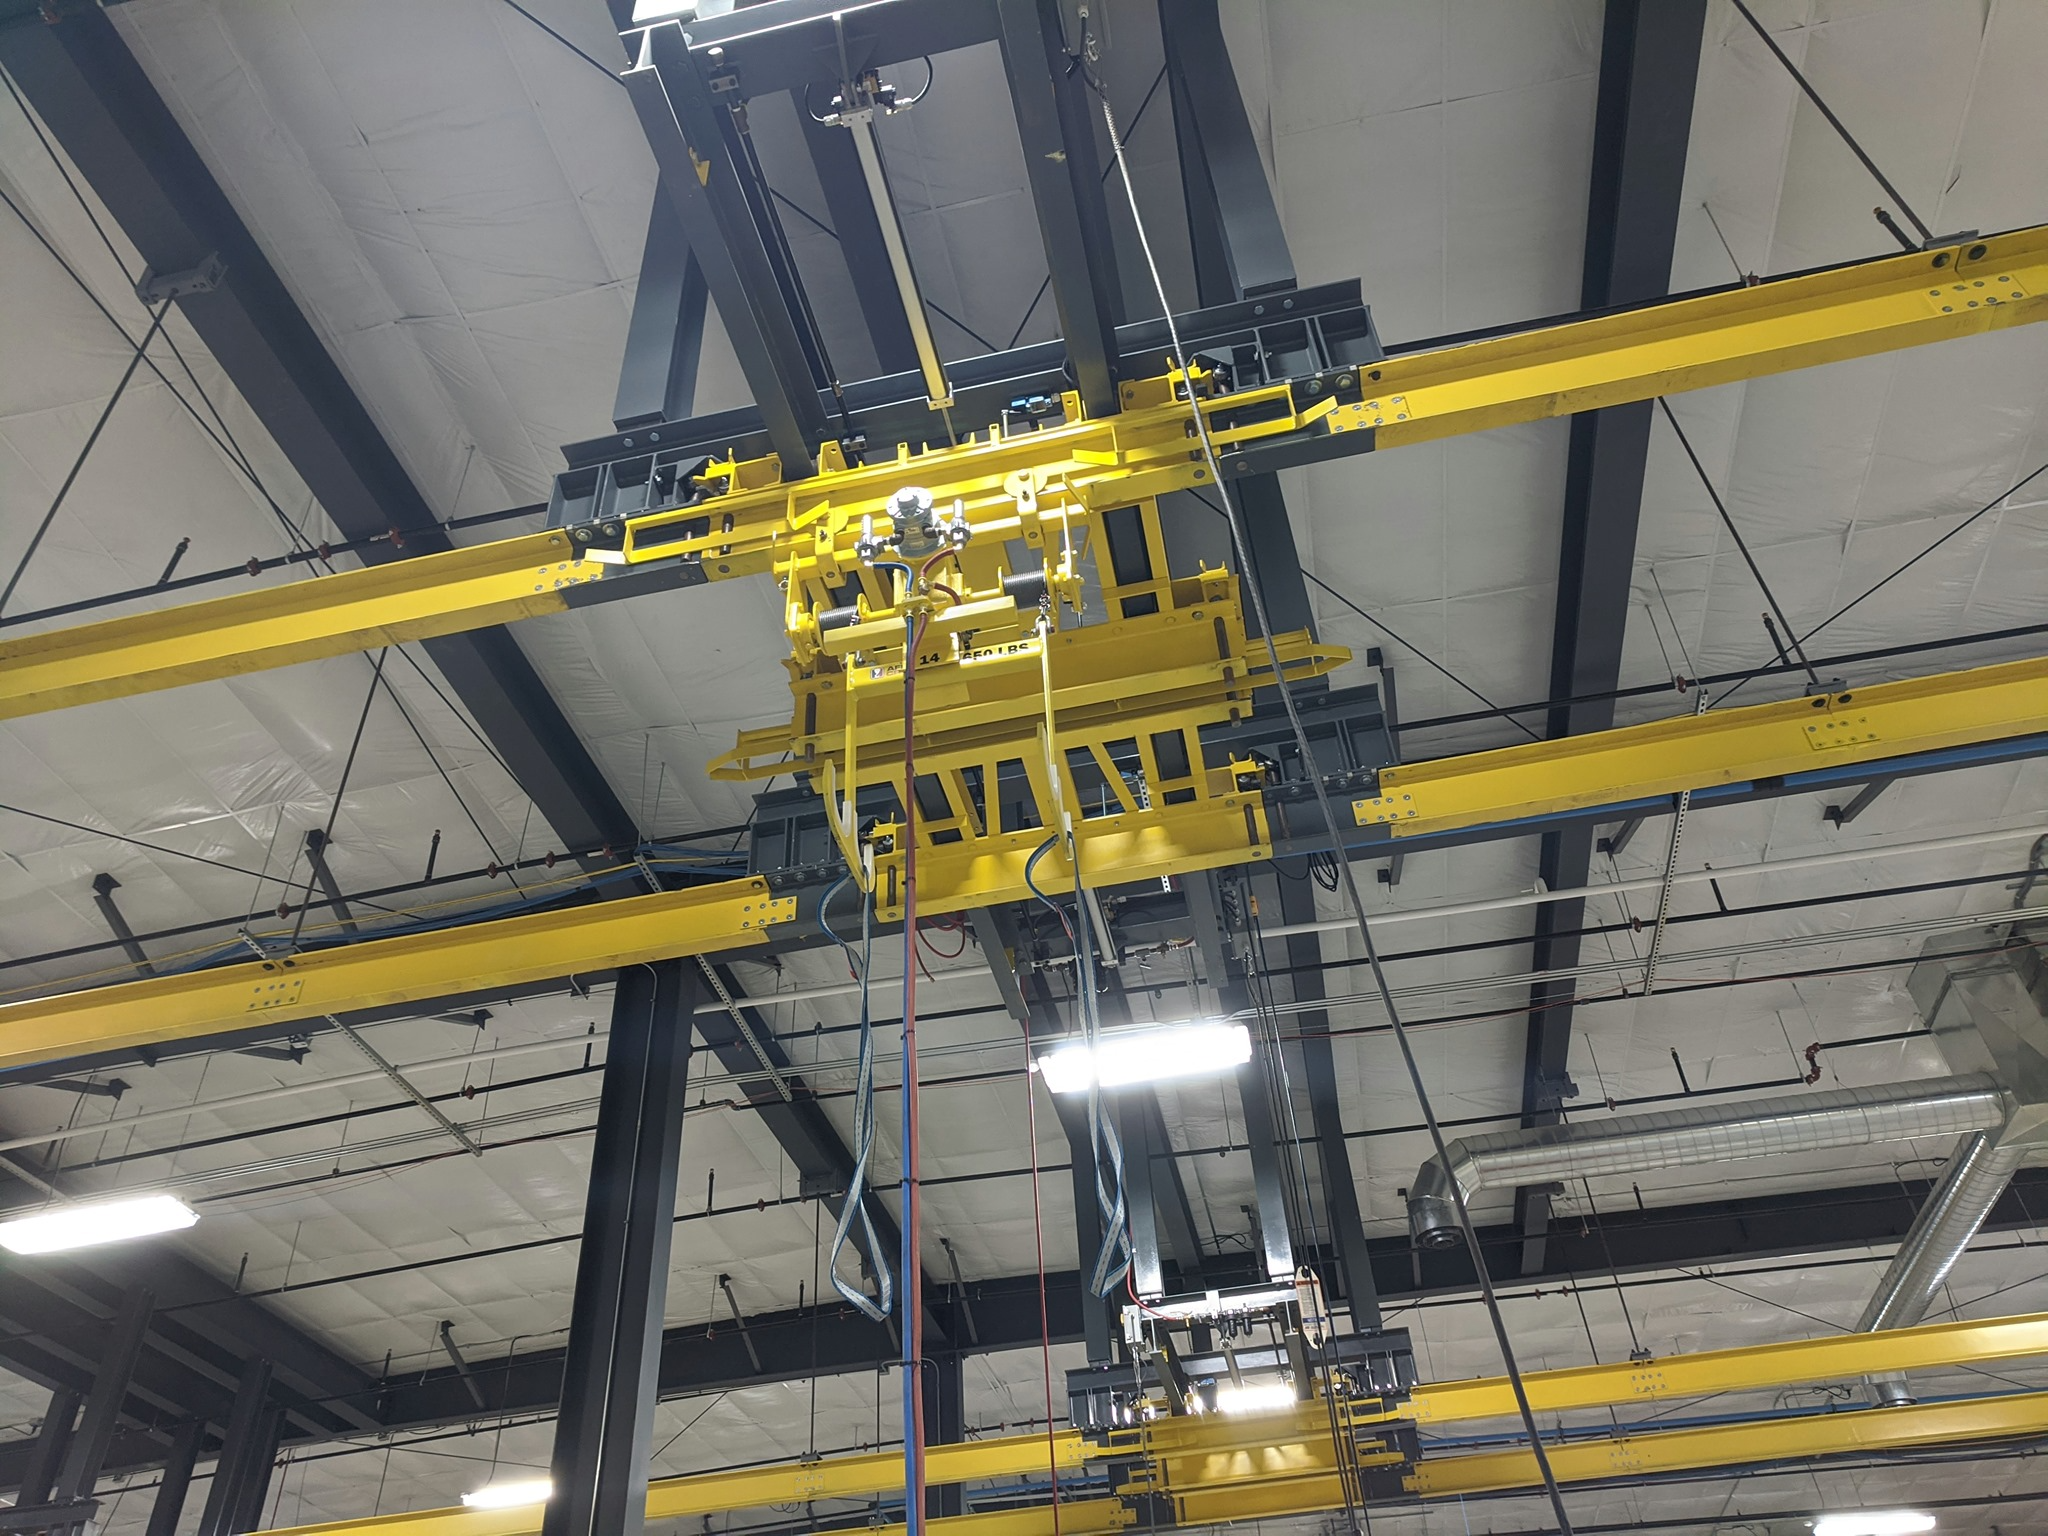 AFE Crane Installs ACCO Monorail, Hoists for Lighting Manufacturer @AccoMhs @thecrosbygroup